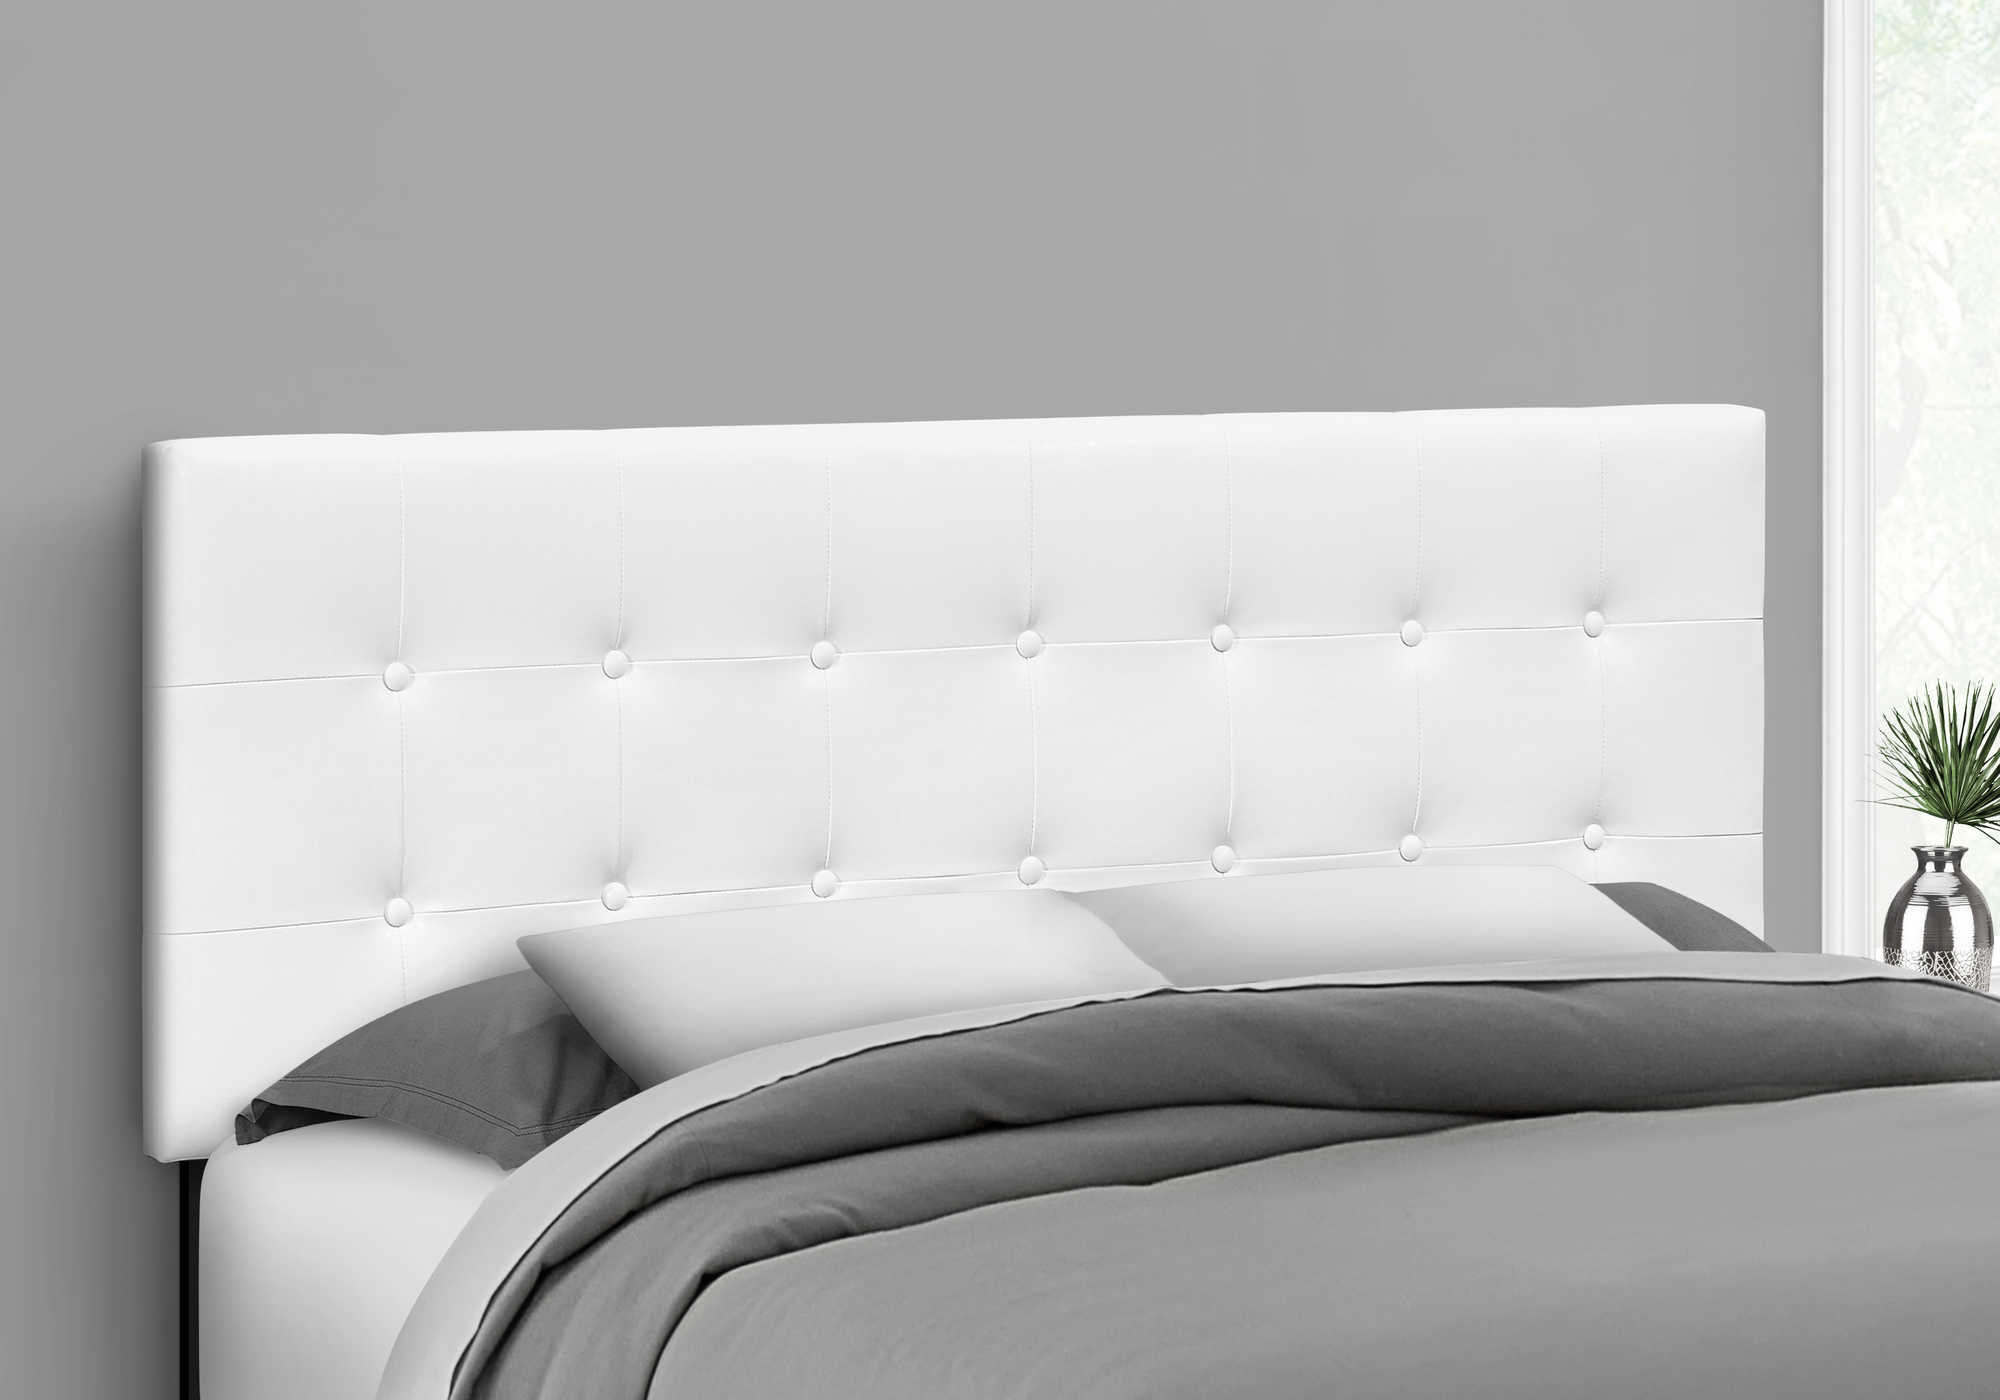 BED - QUEEN SIZE / WHITE LEATHER-LOOK HEADBOARD ONLY